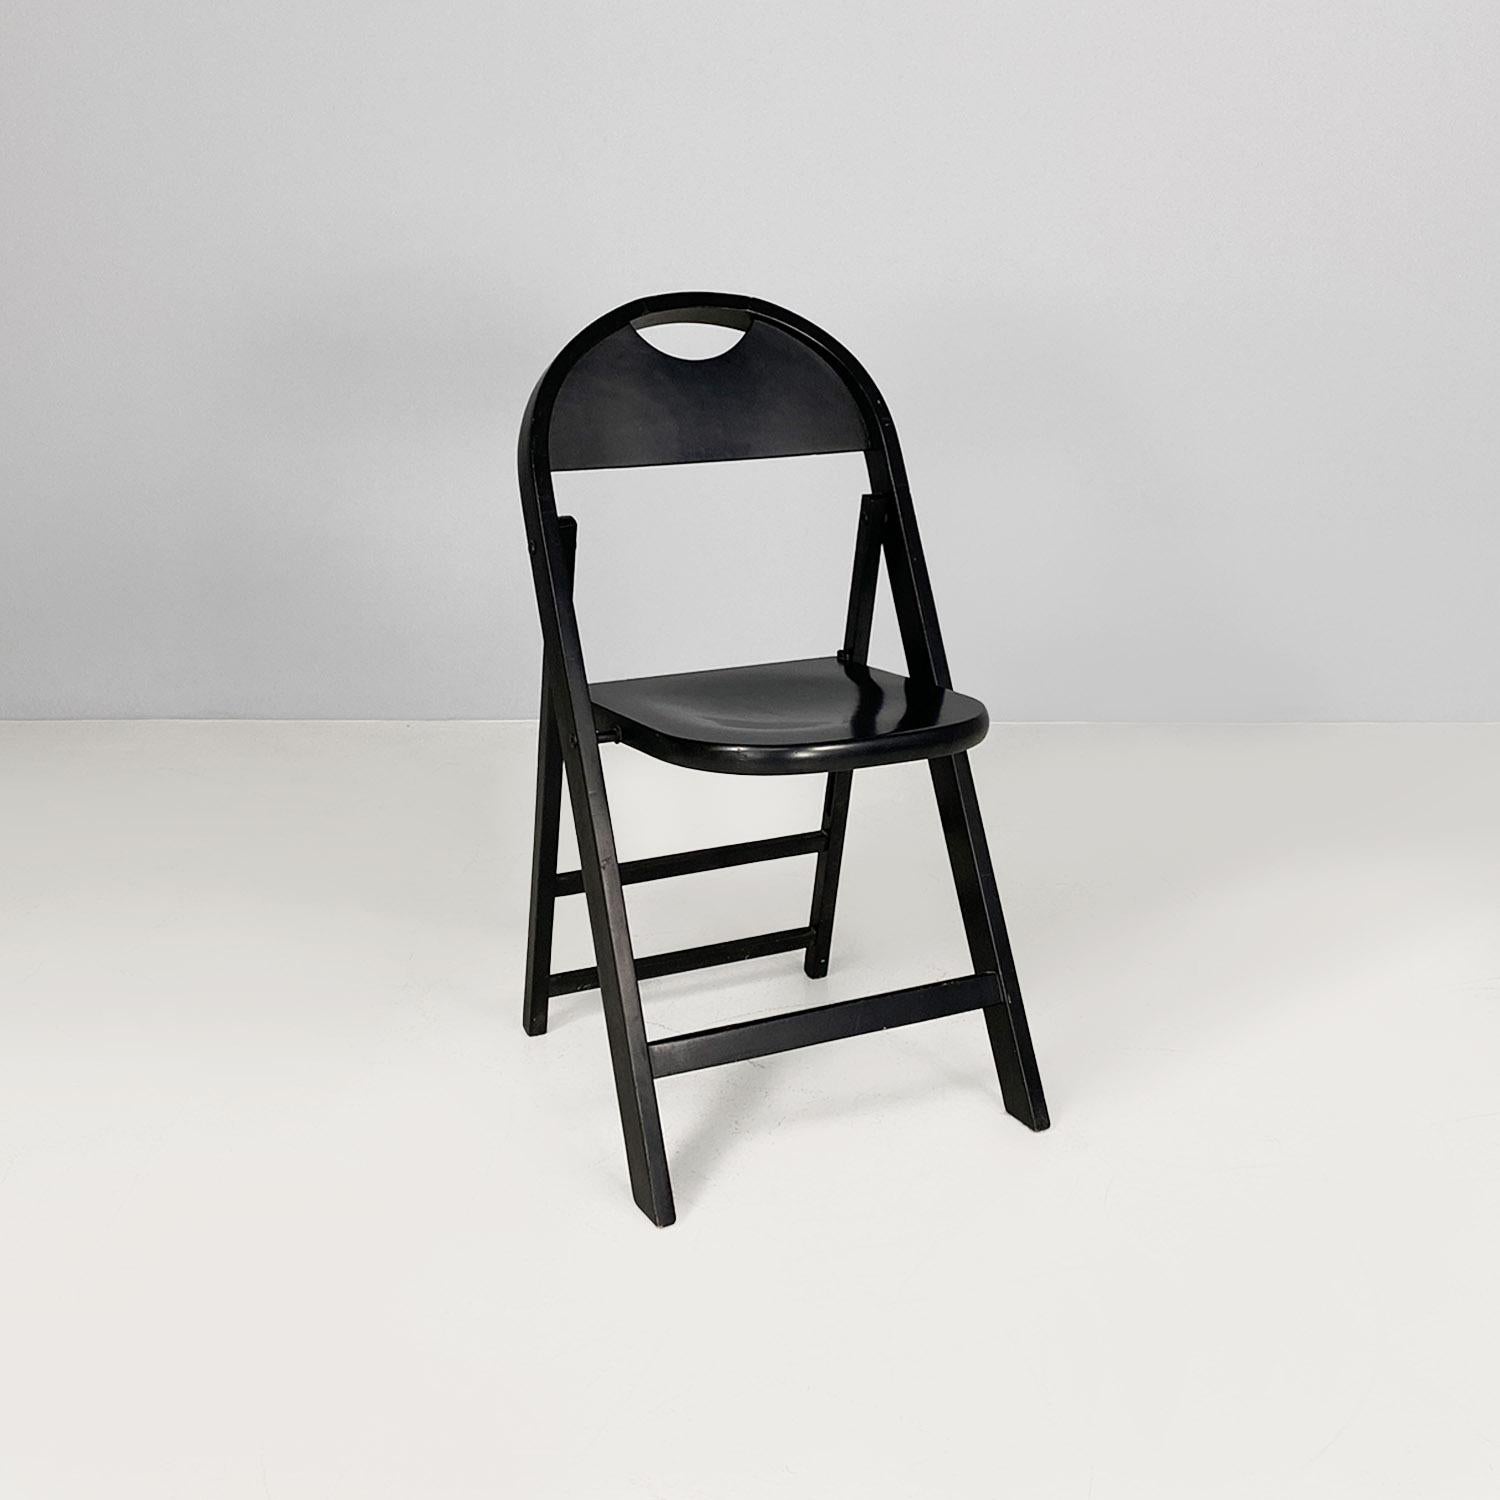 Tric model folding chair, made entirely of wood painted in black, with a rounded seat and back. The legs are rectangular in cross-section.
Produced c. 1960 and designed by Achille and Pier Giacomo Castiglioni.
Good condition, light scattered marks